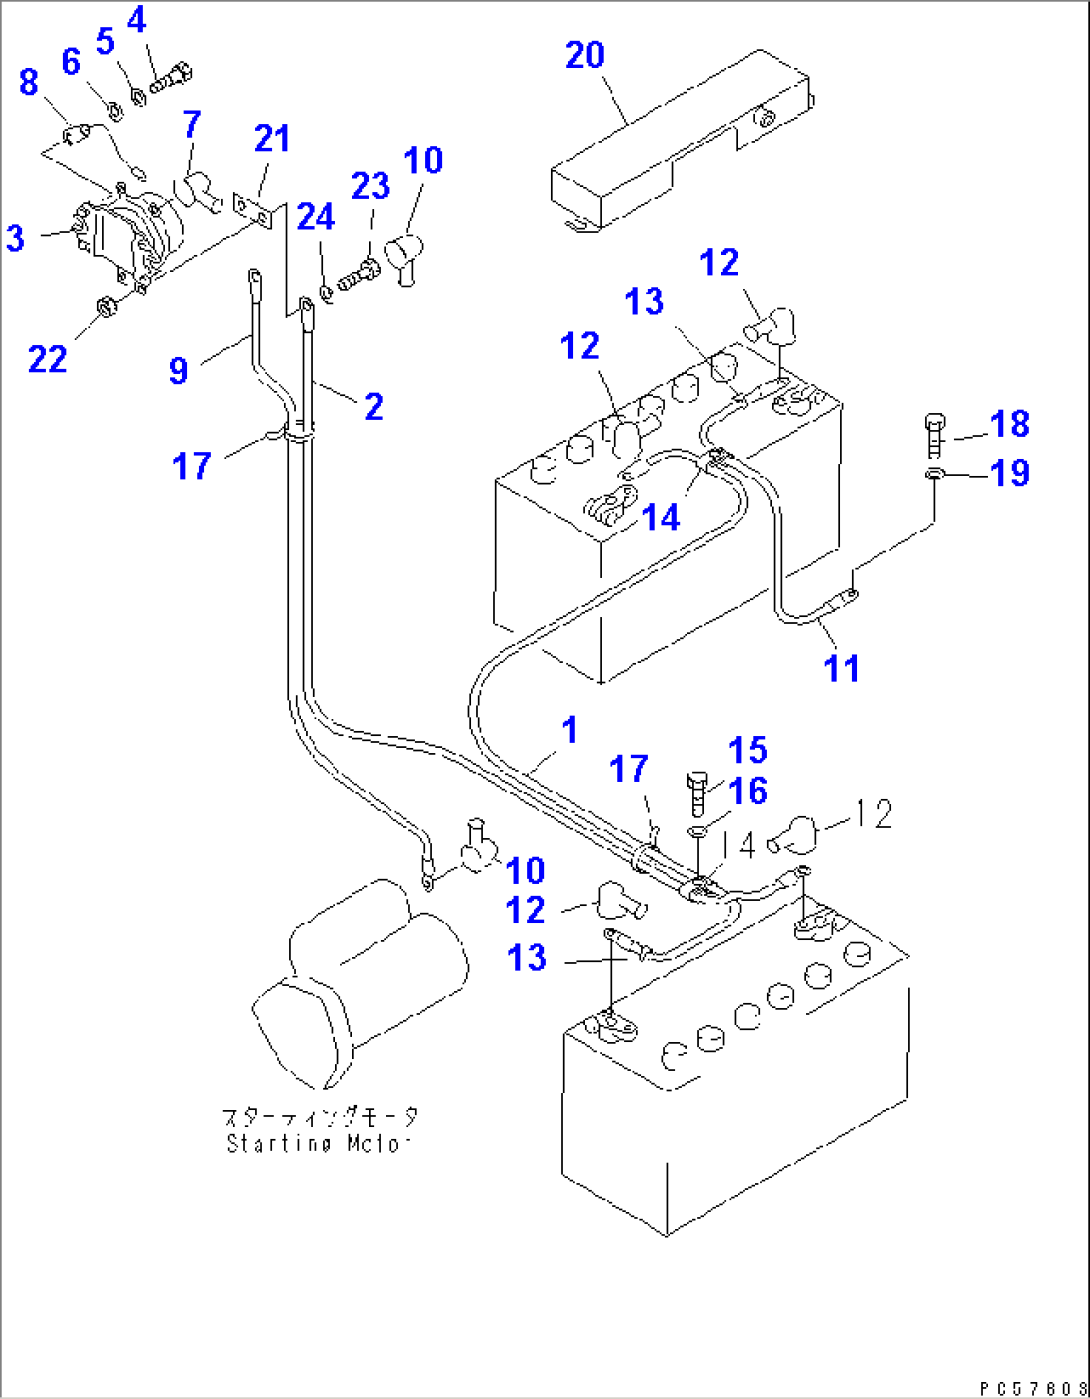 ELECTRICAL SYSTEM (BATTERY LINE)